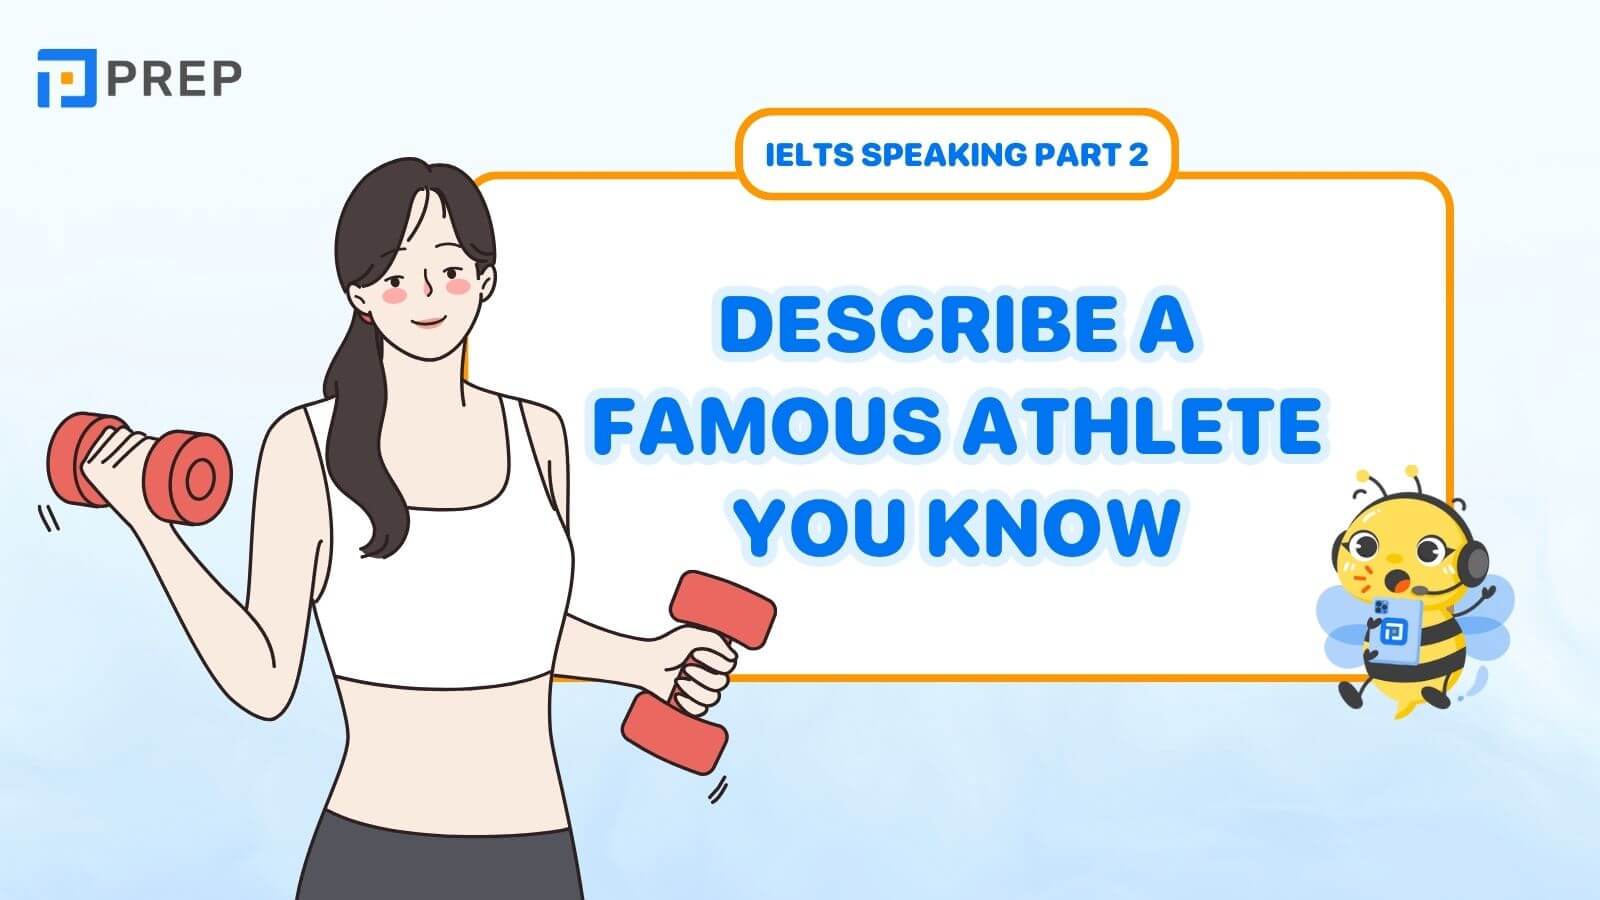 Describe a famous athlete you know